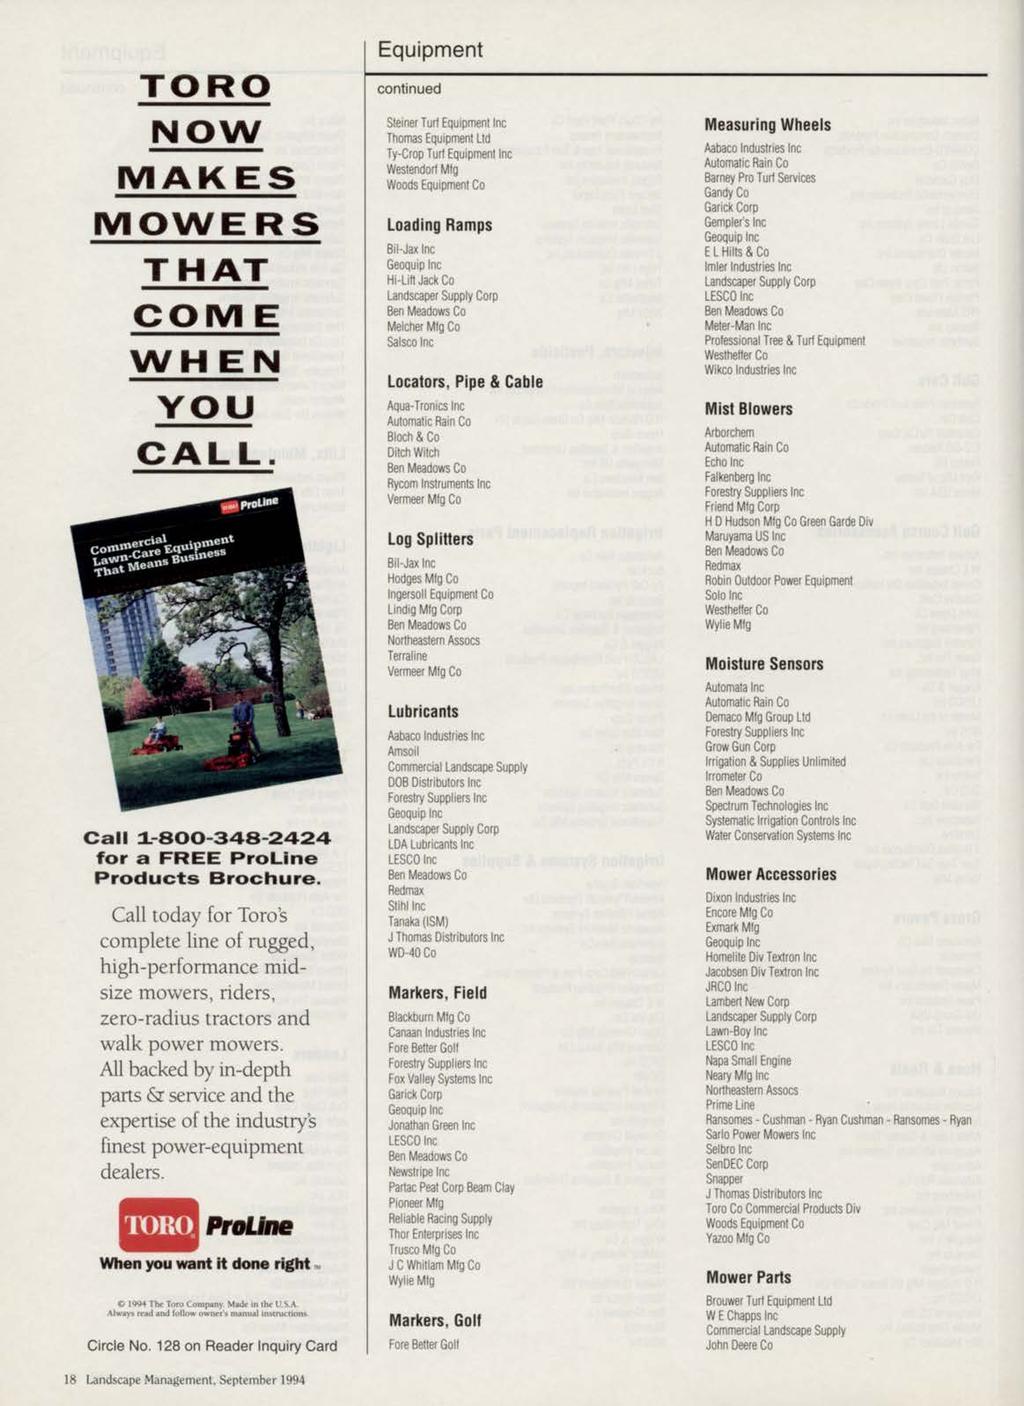 TORO NOW MAKES MOWERS THAT COME WHEN YOU CALL. Call 1-800-348-2424 for a FREE ProLine Products Brochure.